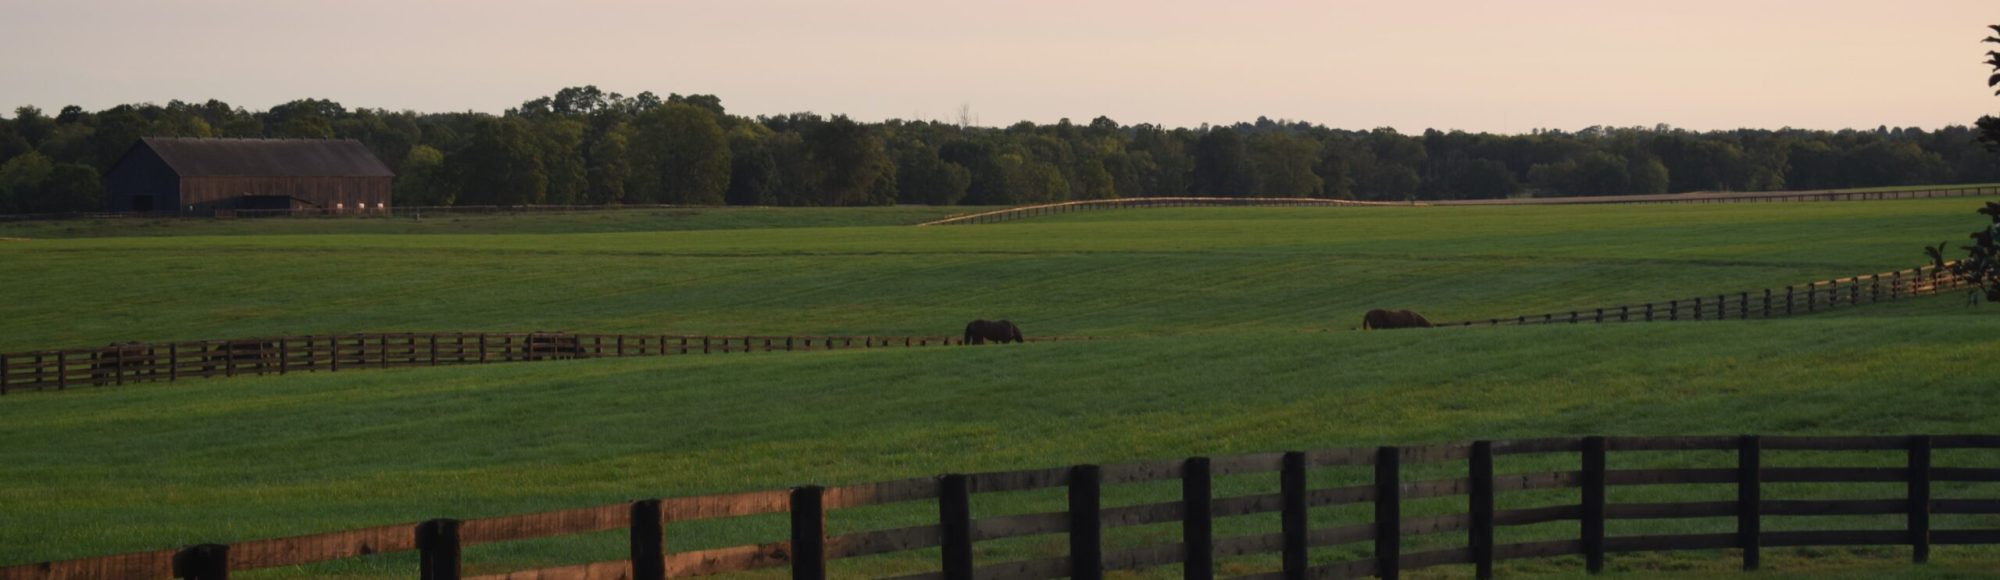 Livery Stable with horses grazing in a fenced in field on lush green grass